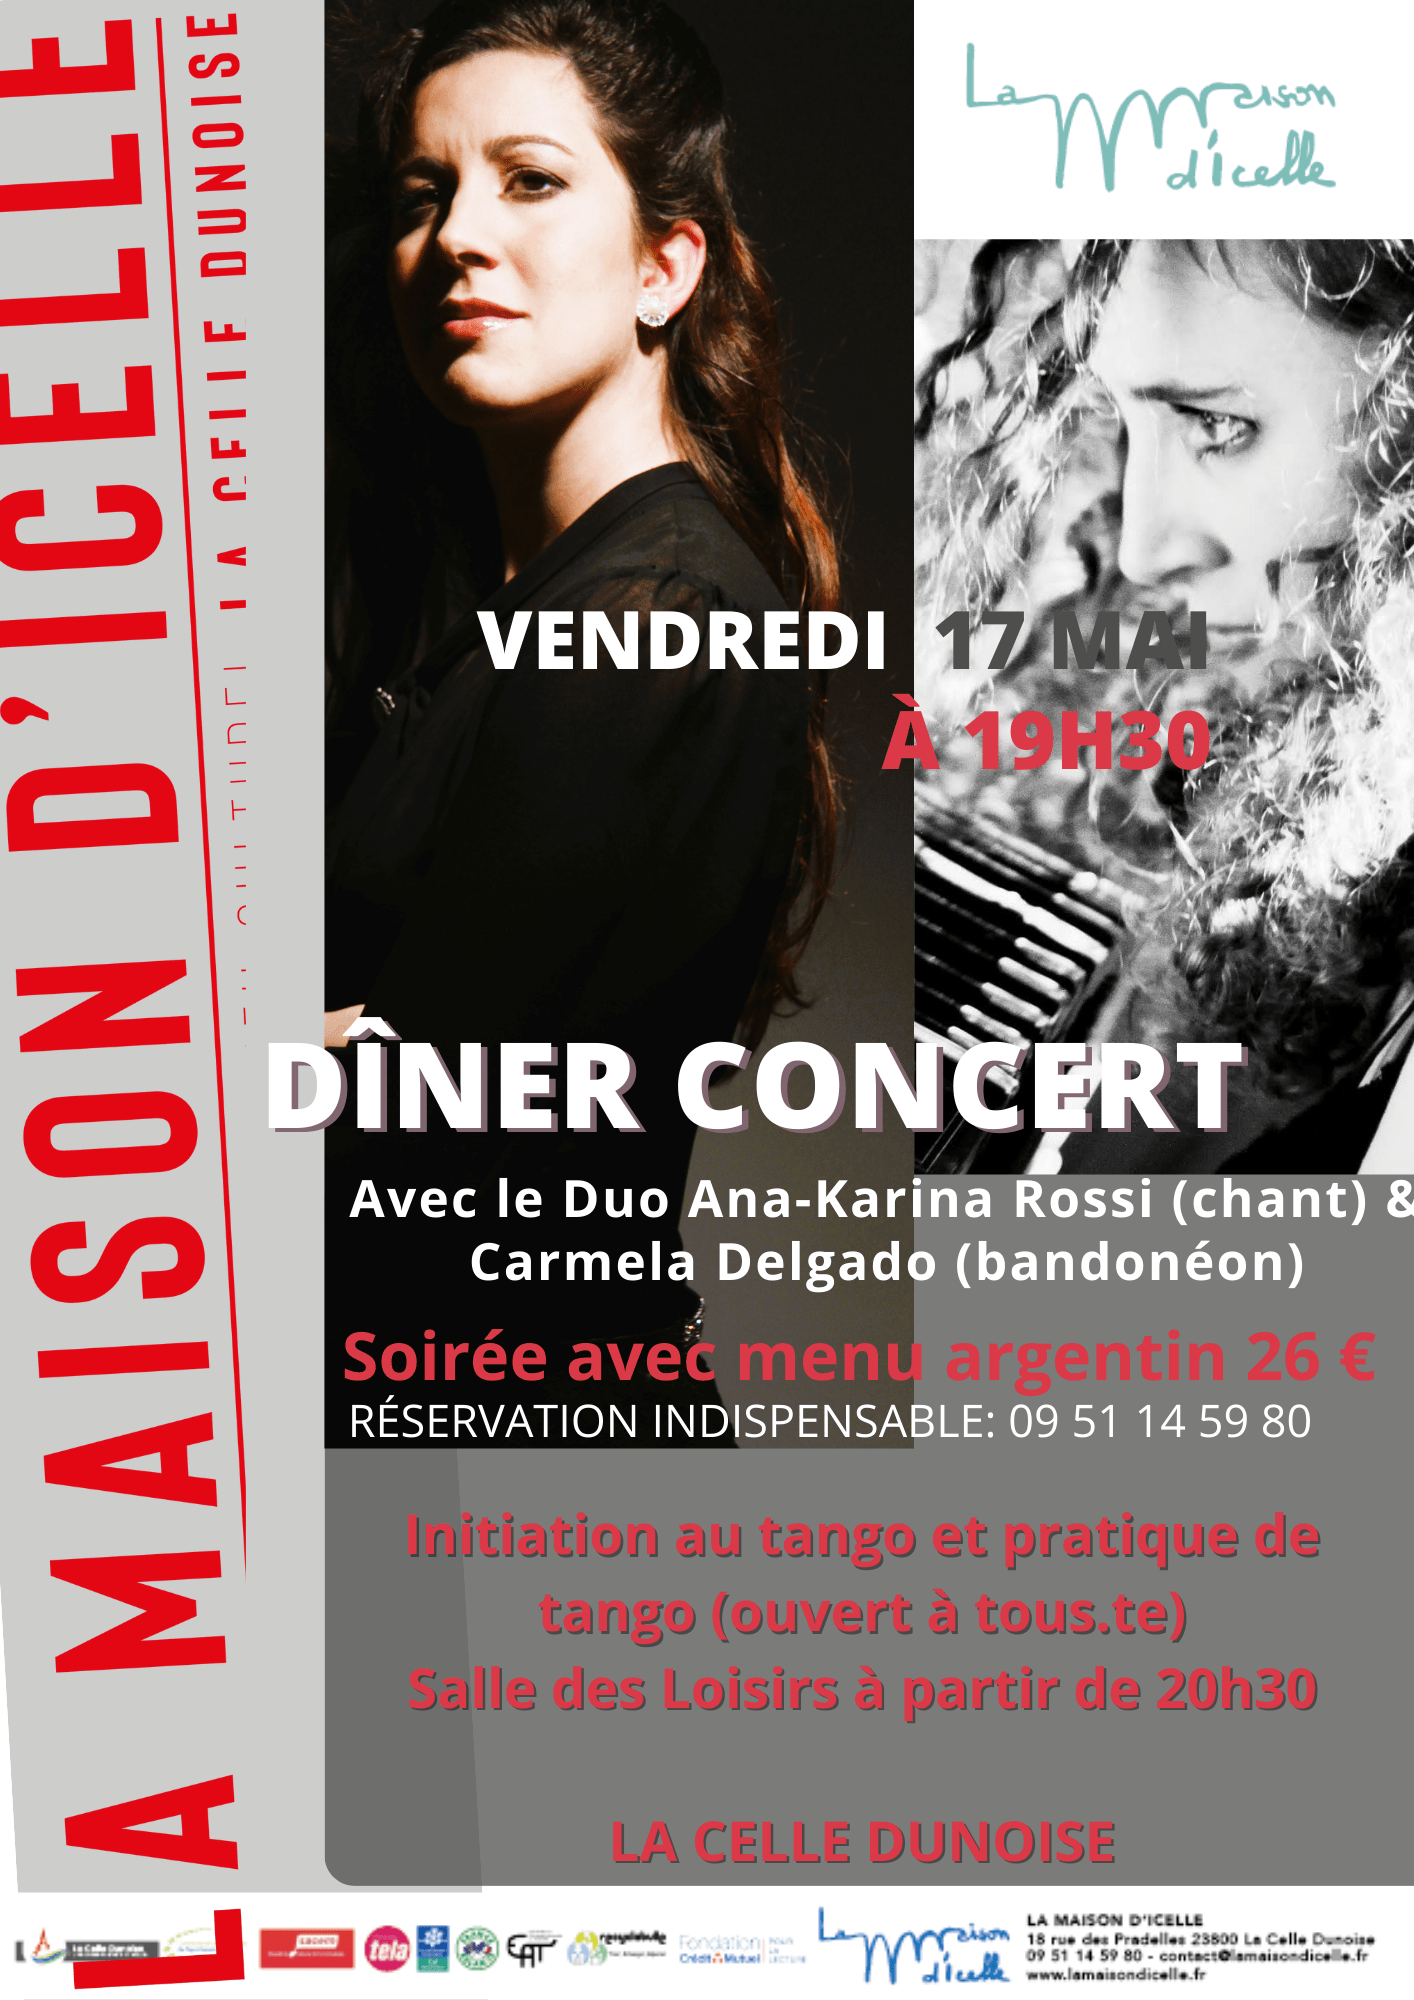 You are currently viewing Ven 17 mai à 19h30 Dîner Concert argentin